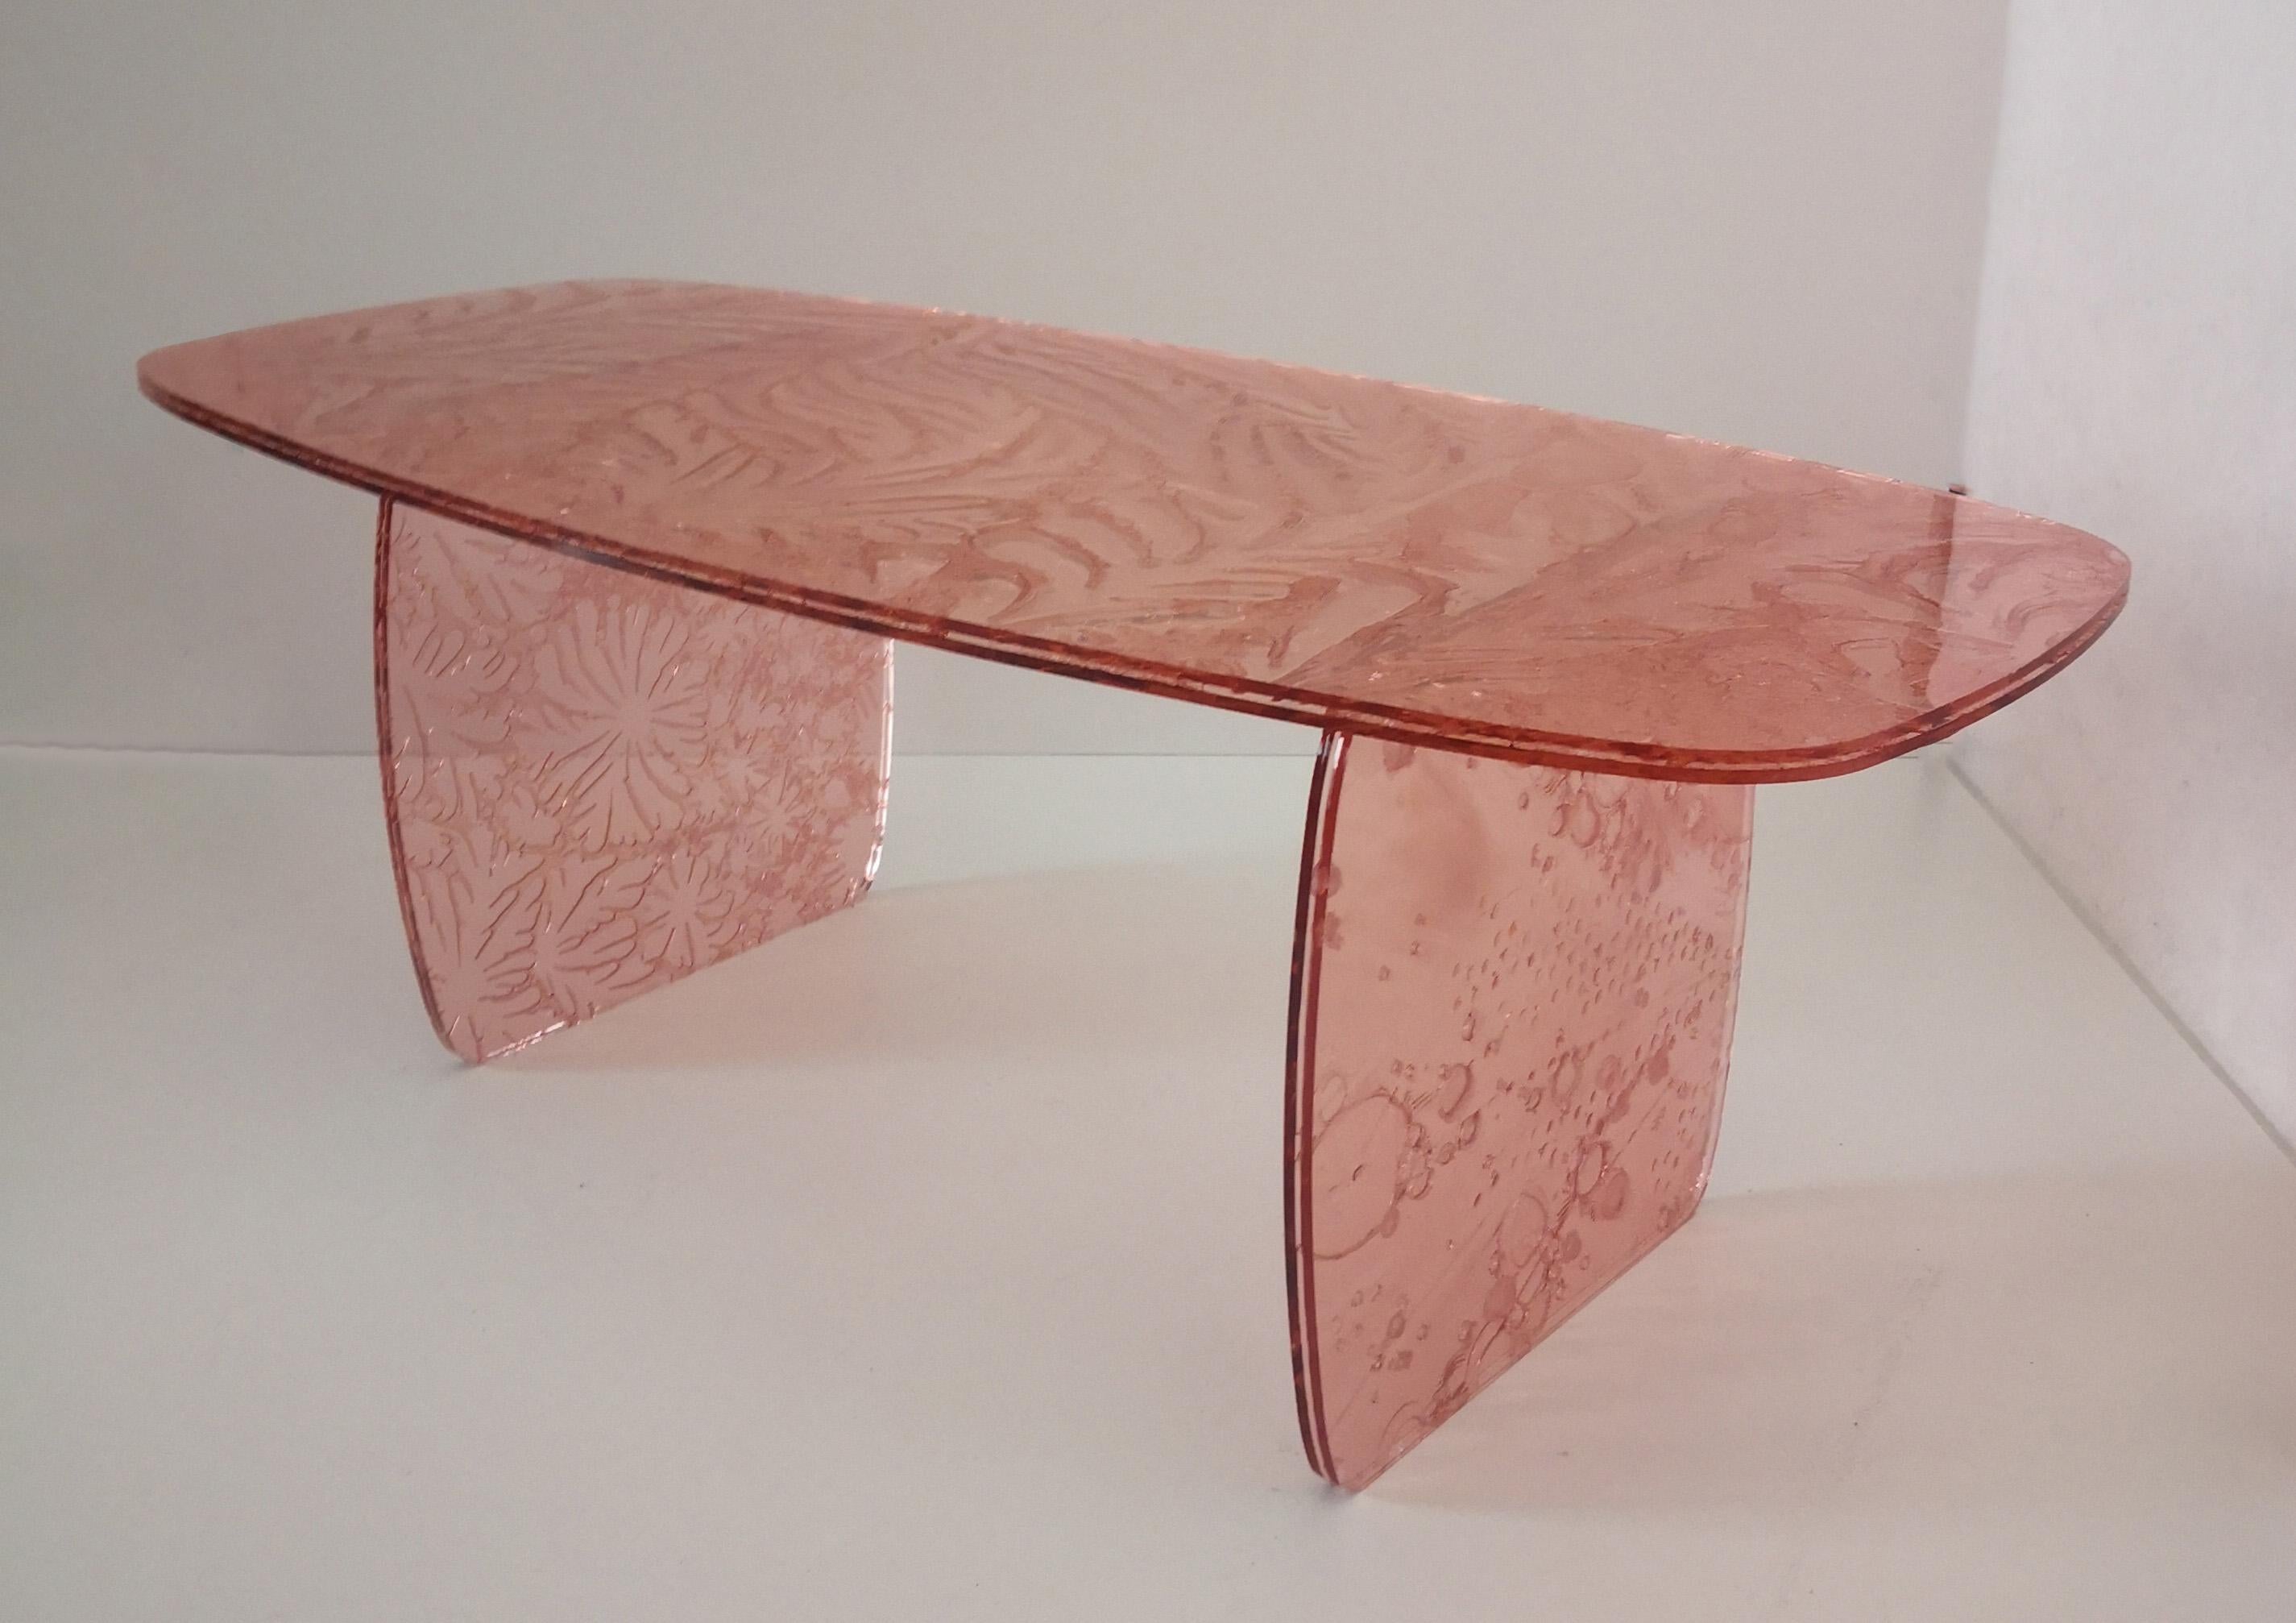 Coffee table, handmade in transparent acrylic colored with an innovative technology.
The material is made through the fusion of three plates, one of which
partially cured center.
This process creates unique and particular effects, shades
transparent